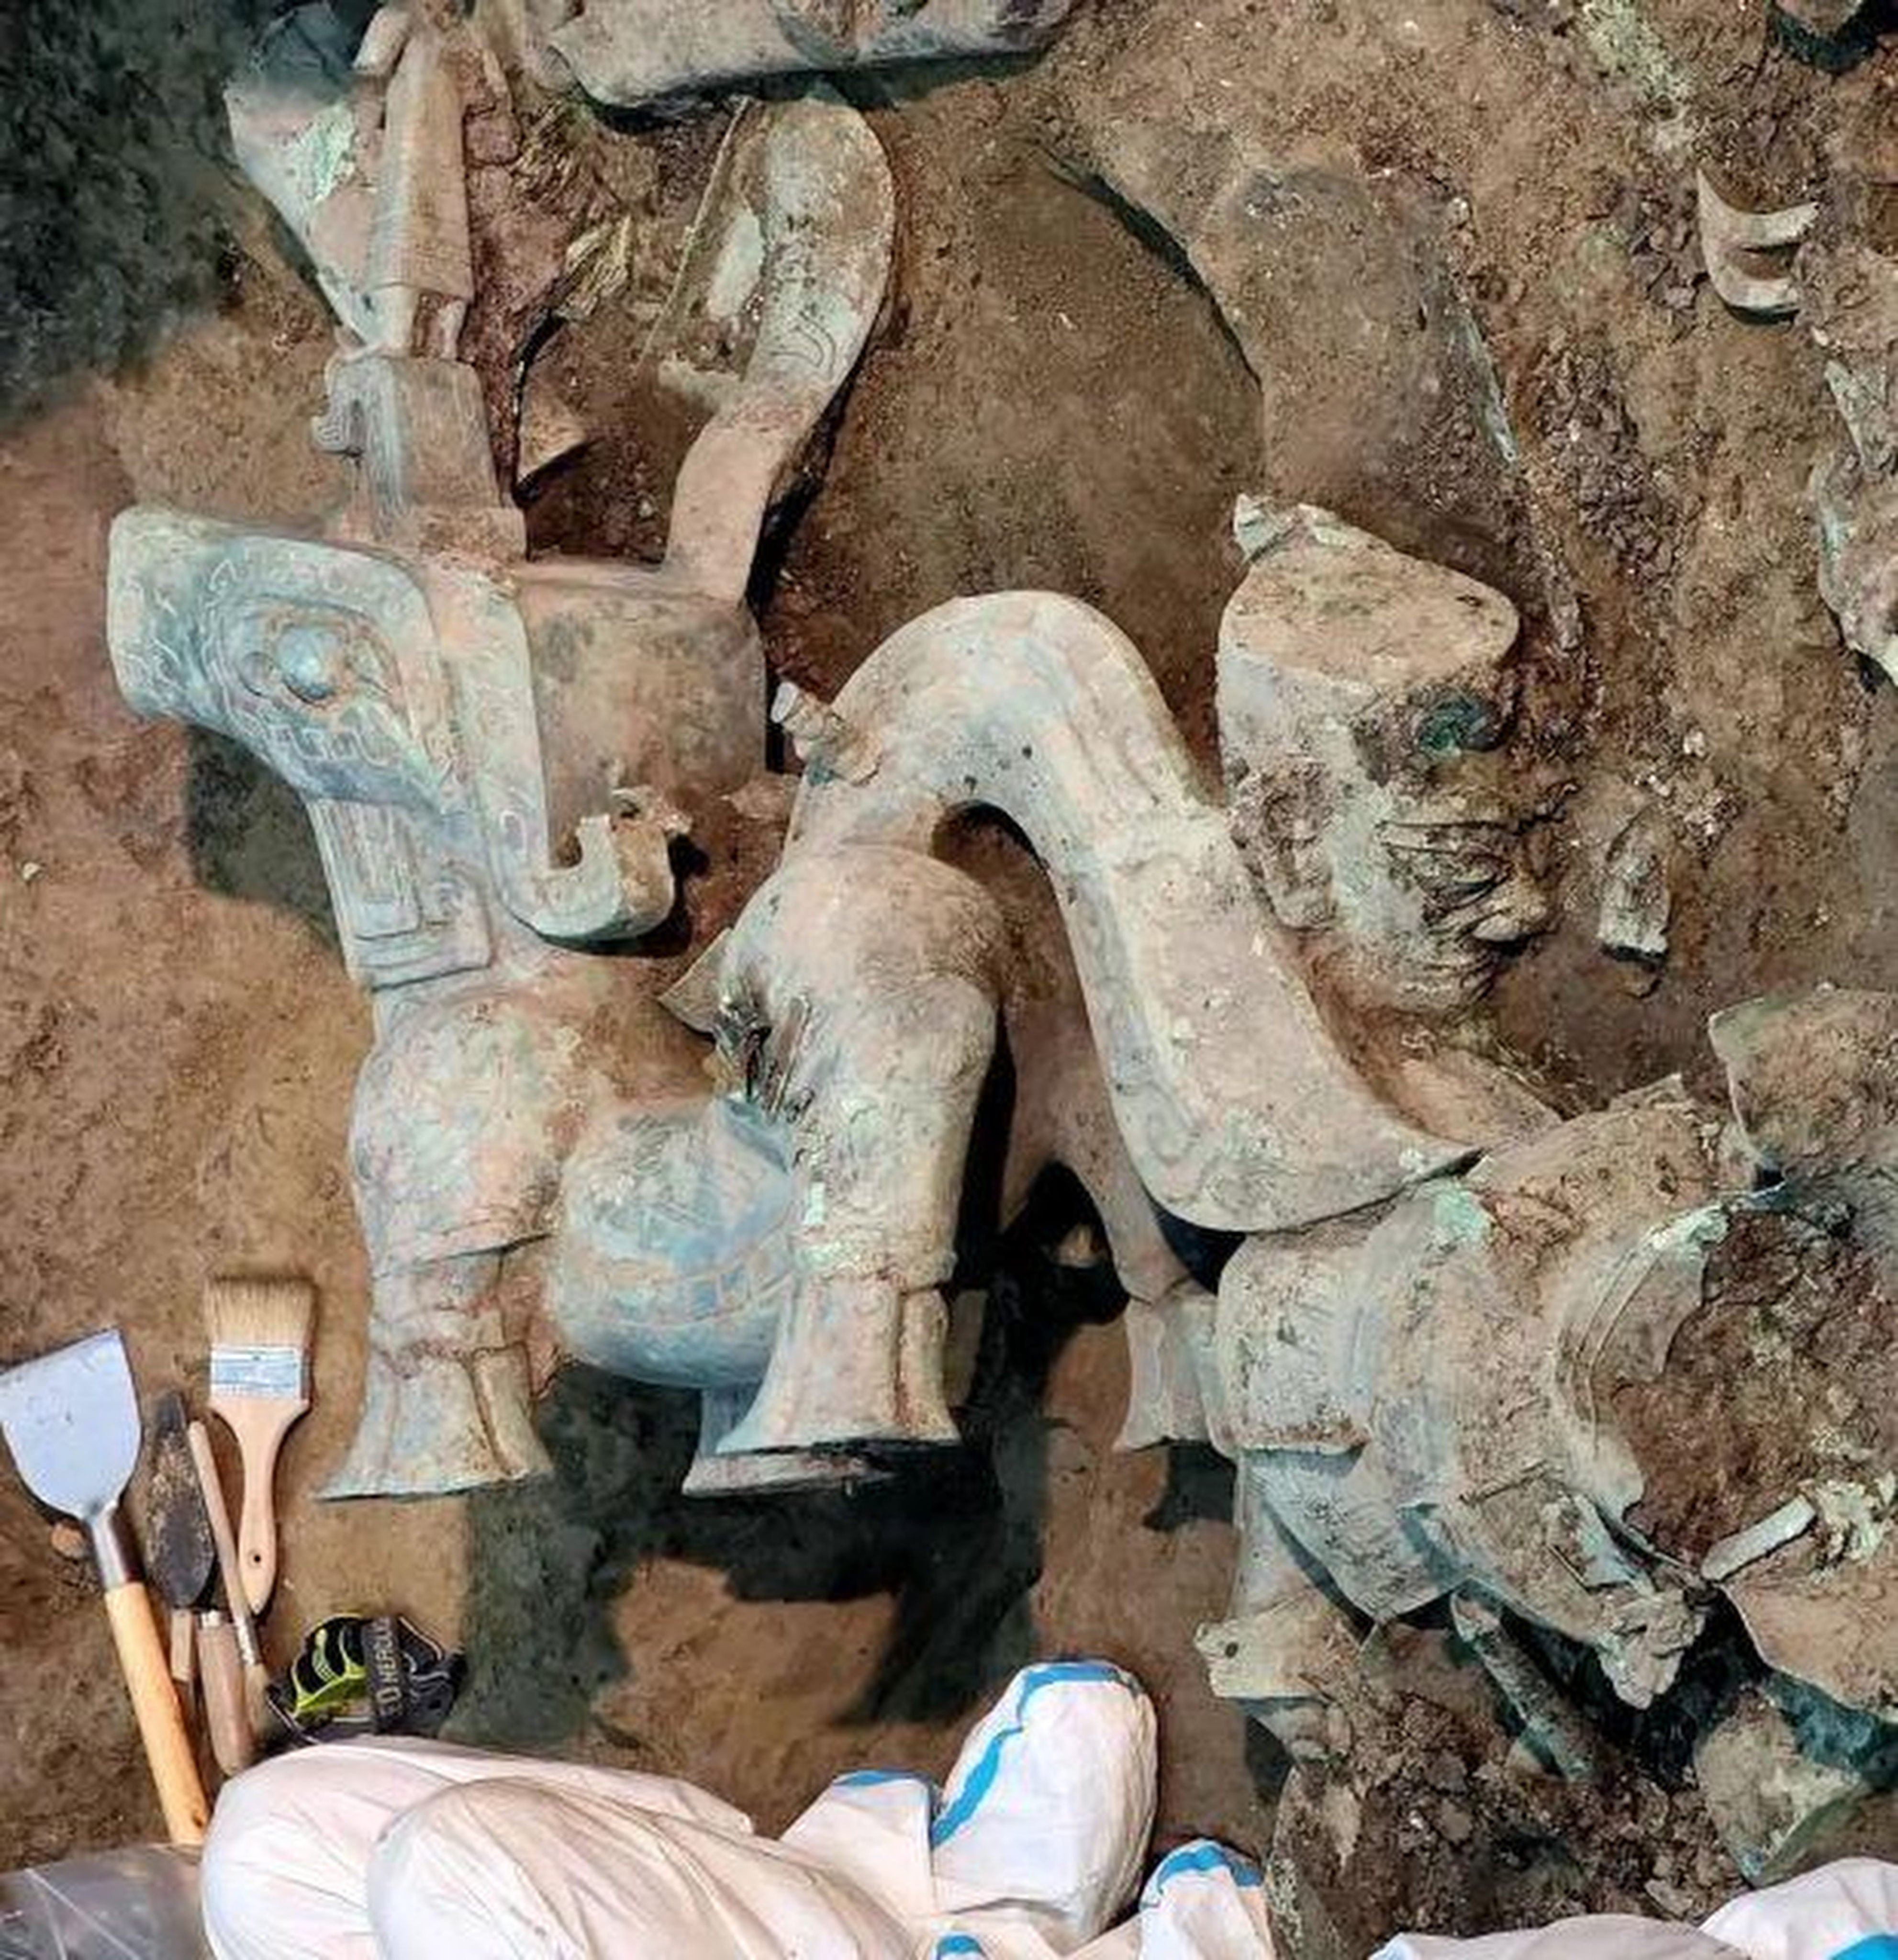 Archaeologists first spotted the animal figure more than a year ago but had to remove other artefacts before they could dig it out of the pit. Photo: Weibo